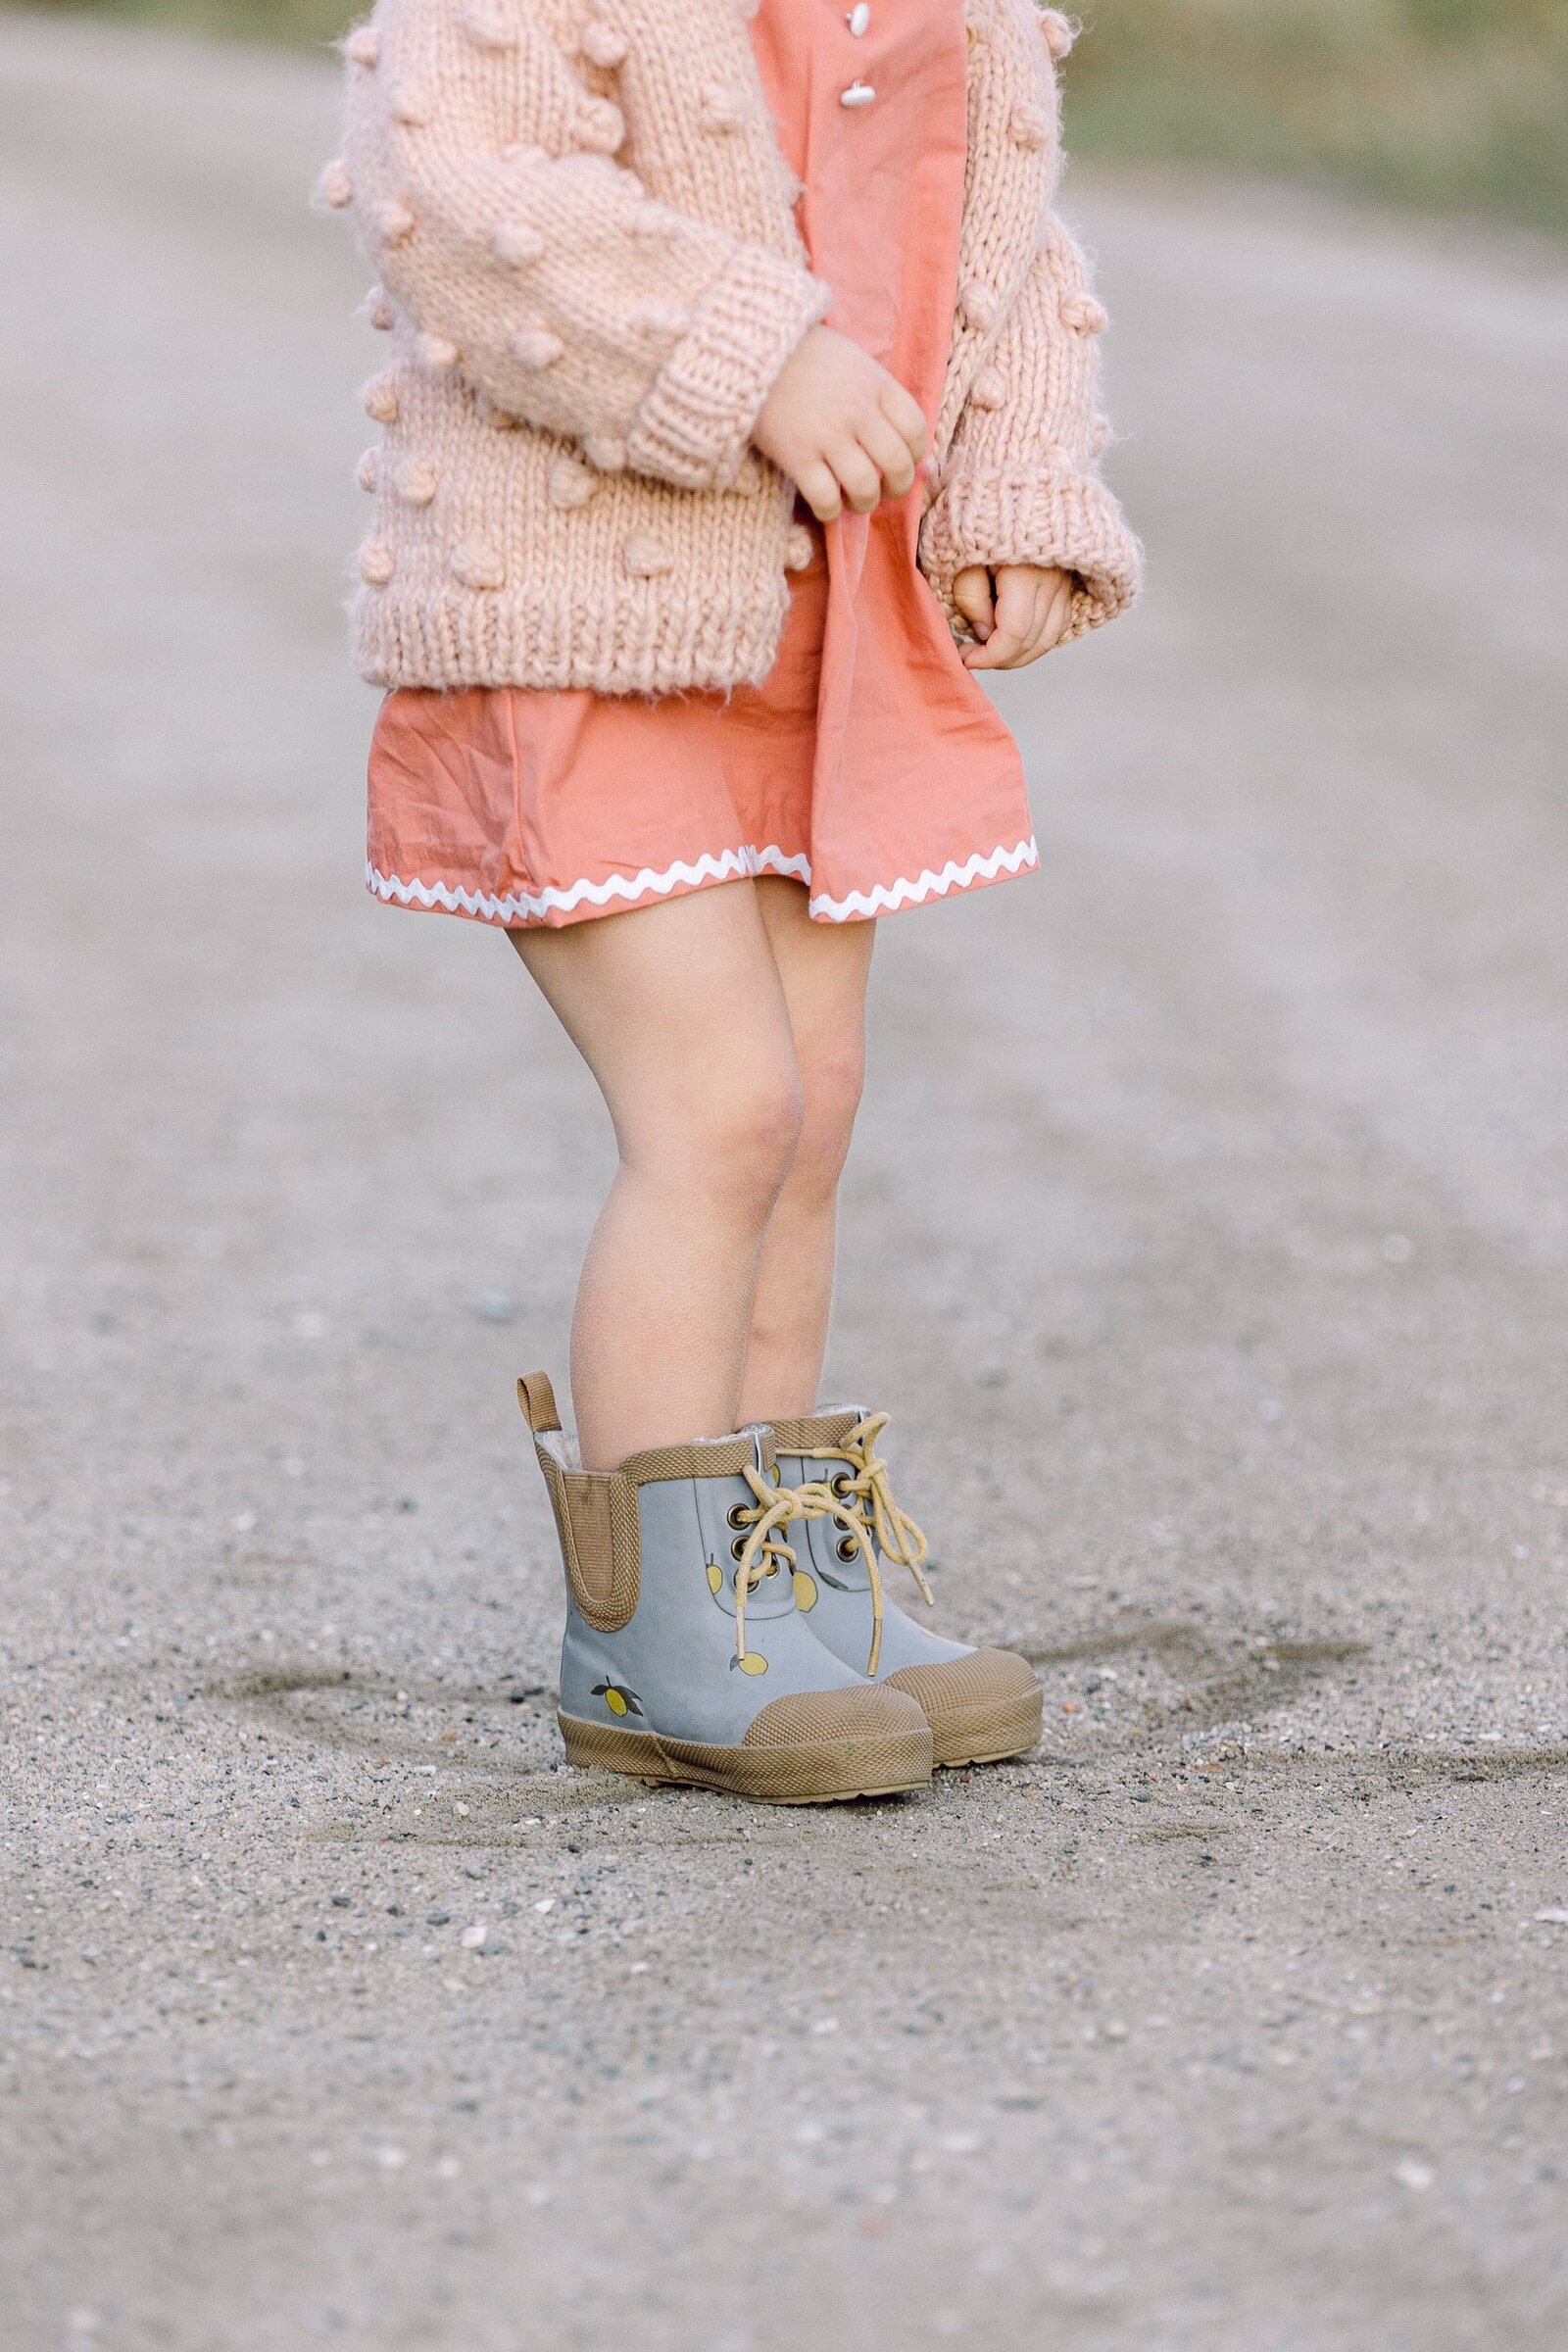 pink dress and blue boots on toddler